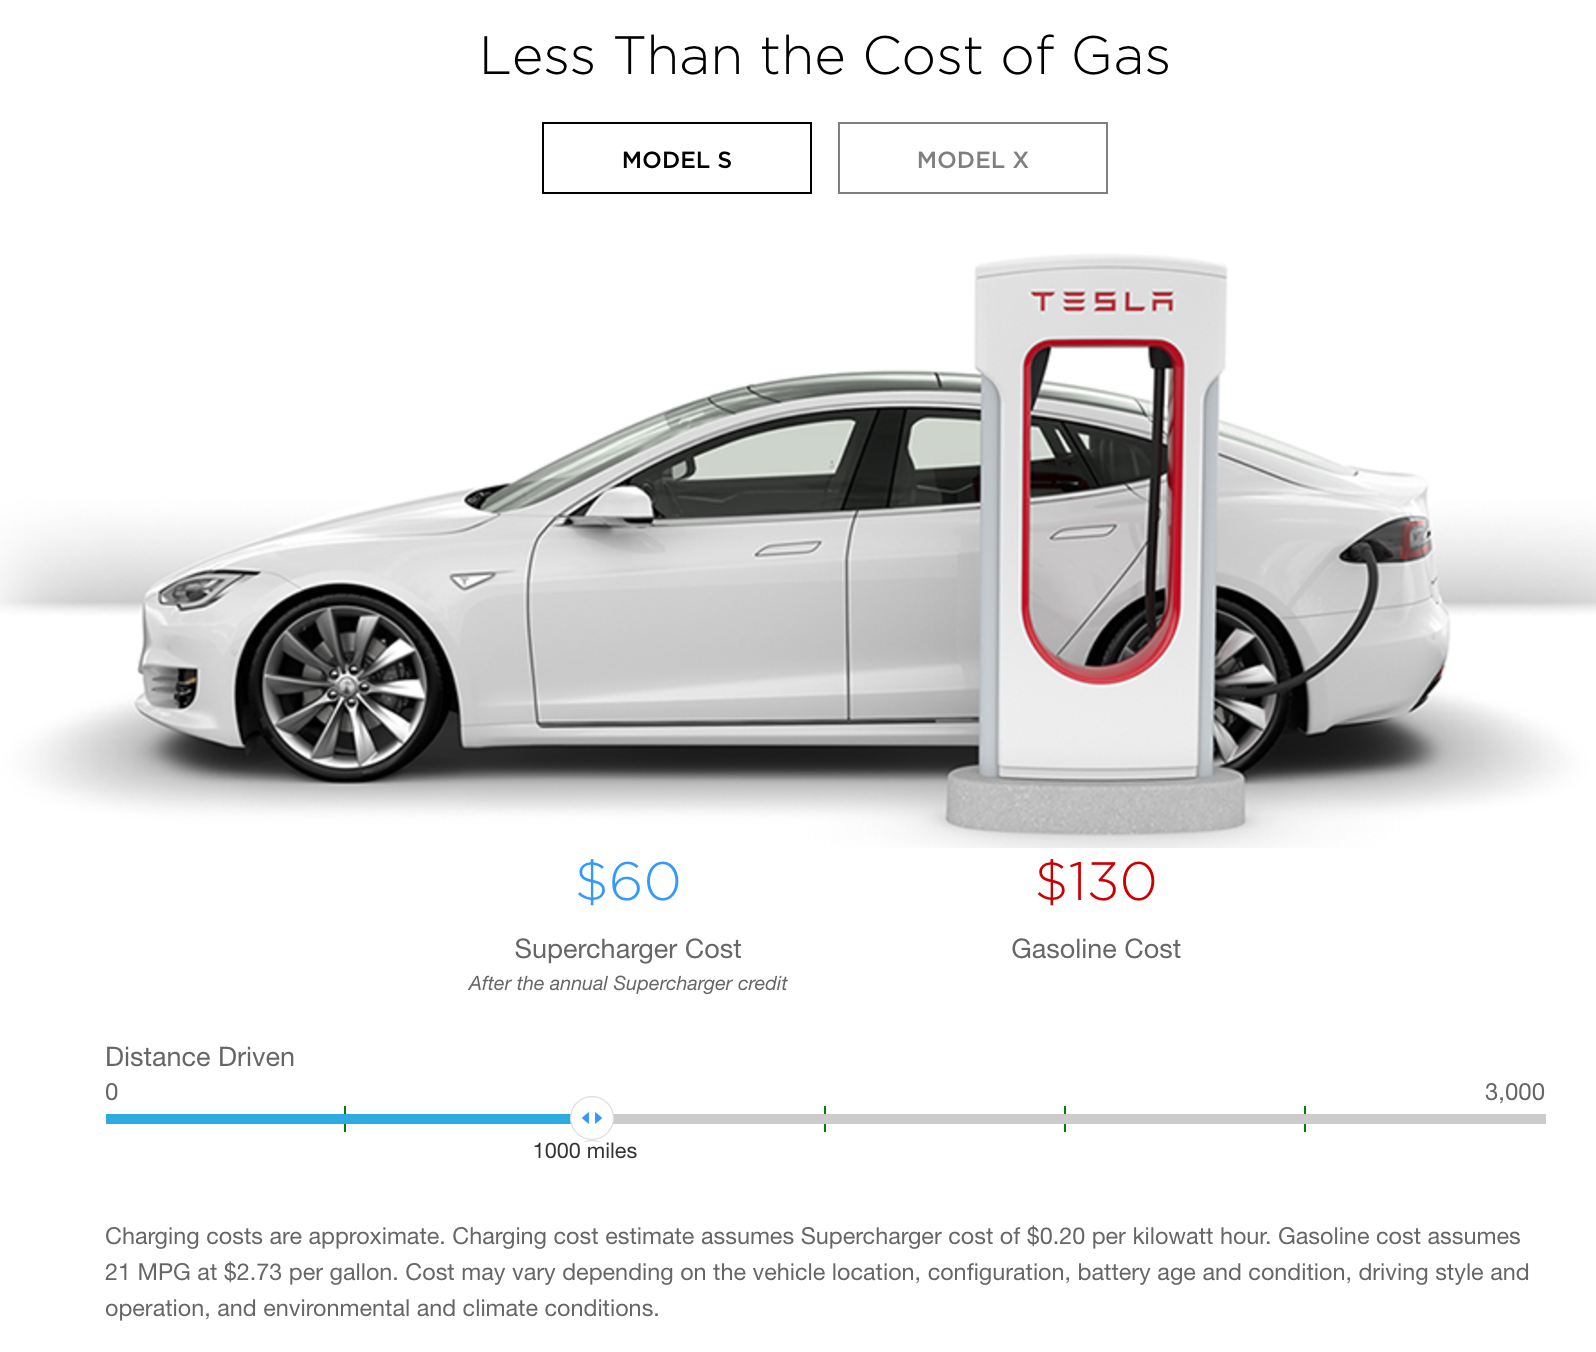 What kind of outlet do you need to charge a Tesla?